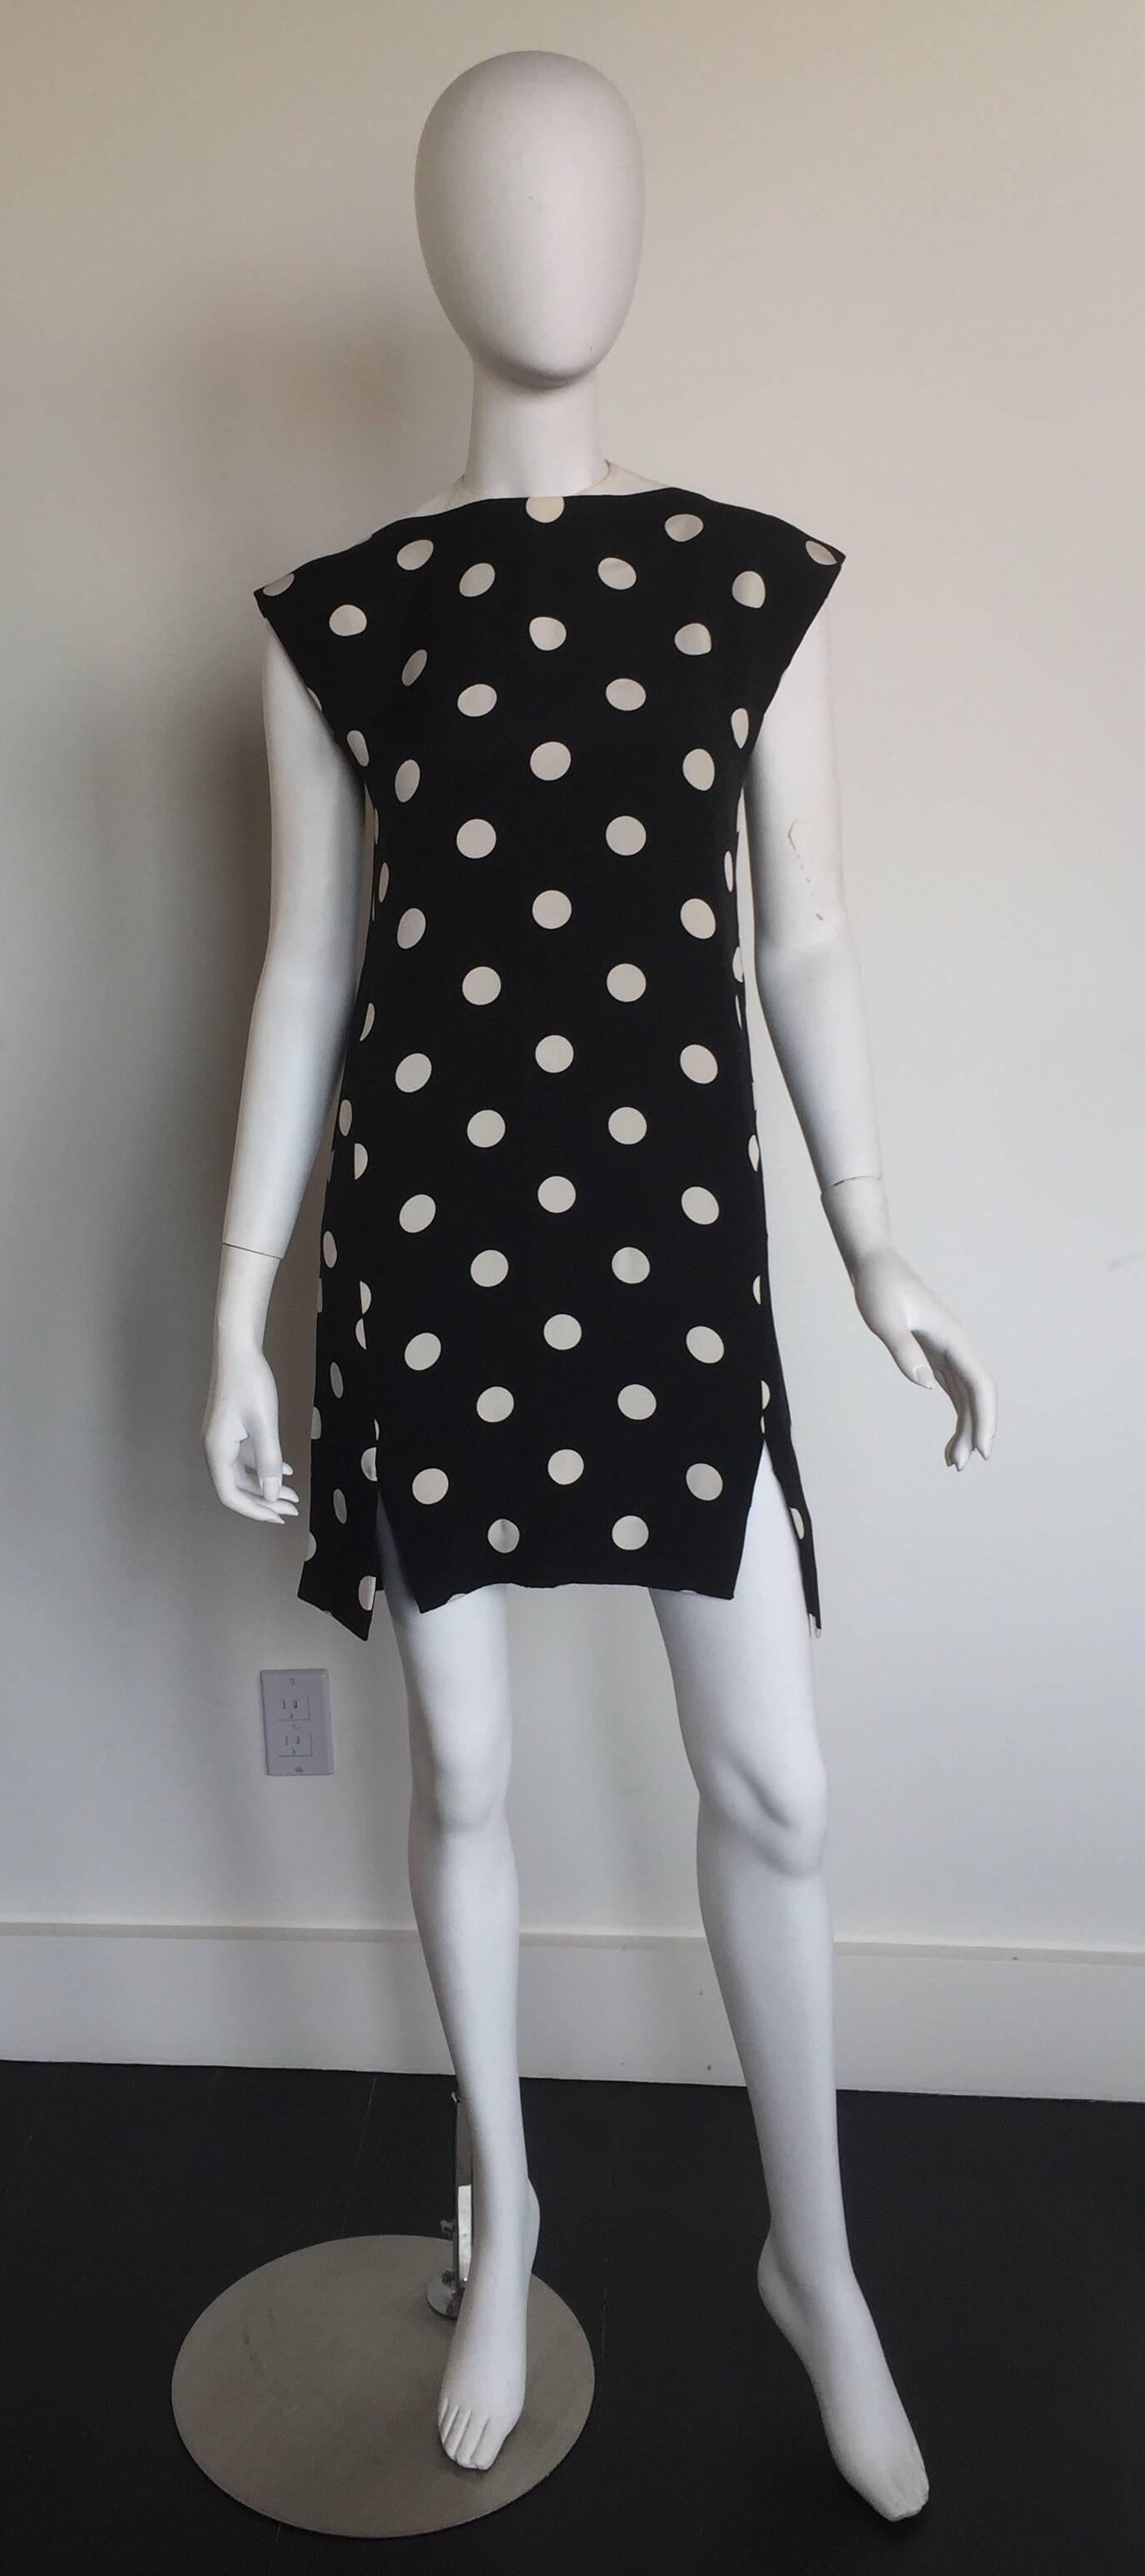 This dress is from the late 1970's.  This black silk dress has white polka dots and a white ribbed collar. There are two small slits in the front of the dress above each knee.

BUST: 36